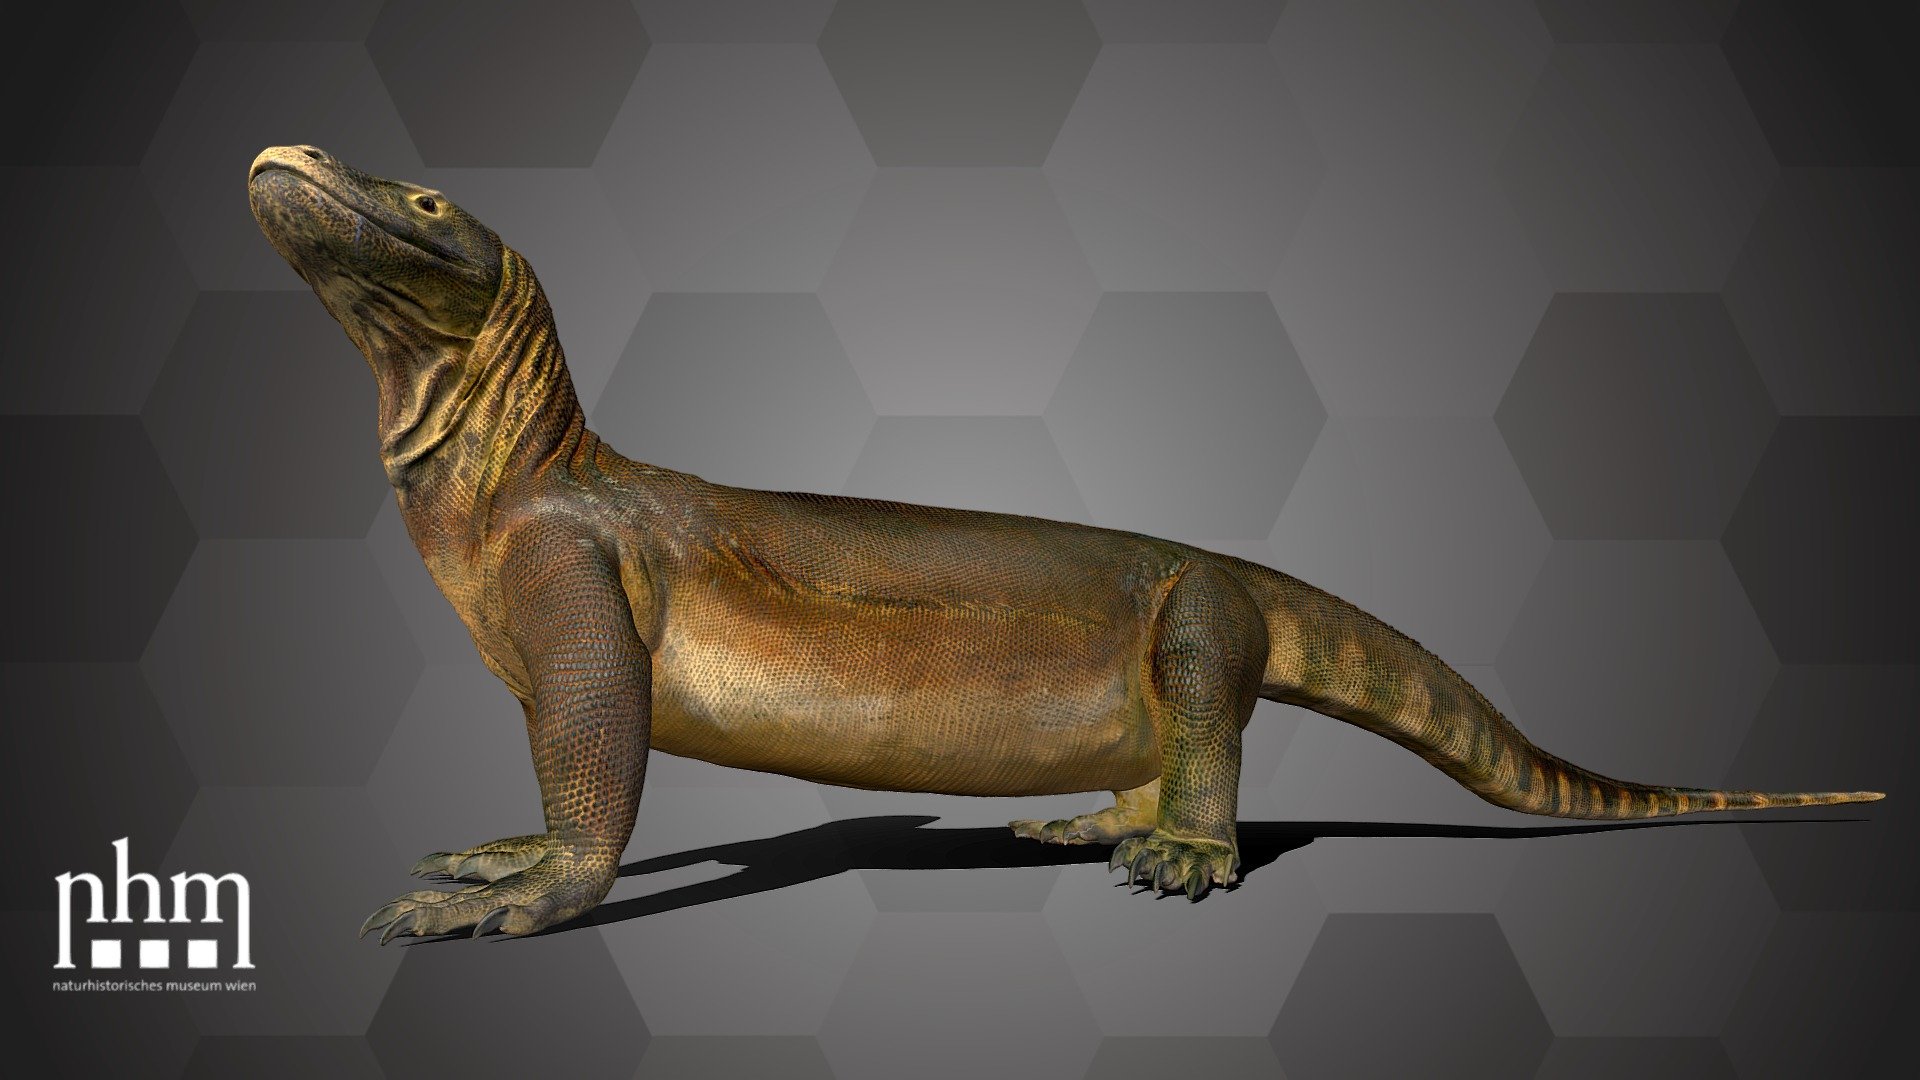 3D scan of a Komodo dragon (Varanus komodoensis), the largest lizard species in the world. The males grow up to 3 m long and weigh 70 kg. The Komodo dragon lives on the island of Komodo and the surrounding Indonesian islands in savannahs and dry forests.

This specimen is Number 71 of the NHM Top 100 and can be found in Hall 28 of the Natural History Museum Vienna.

Specimen: Varanus komodoensis 

Inventory number: NHMW-Zoo1-HS 23783

Collection: Natural History Museum Vienna, 1st Zoological Department, Herpetology collection (curator: Silke Schweiger)

Find out more about the NHM Vienna here.

Scanned and edited by Corinna Baldingen, Anna Haider and Viola Winkler (NHMW)

Scanner: Artec Leo. Infrastructure funded by the FFG 3d model